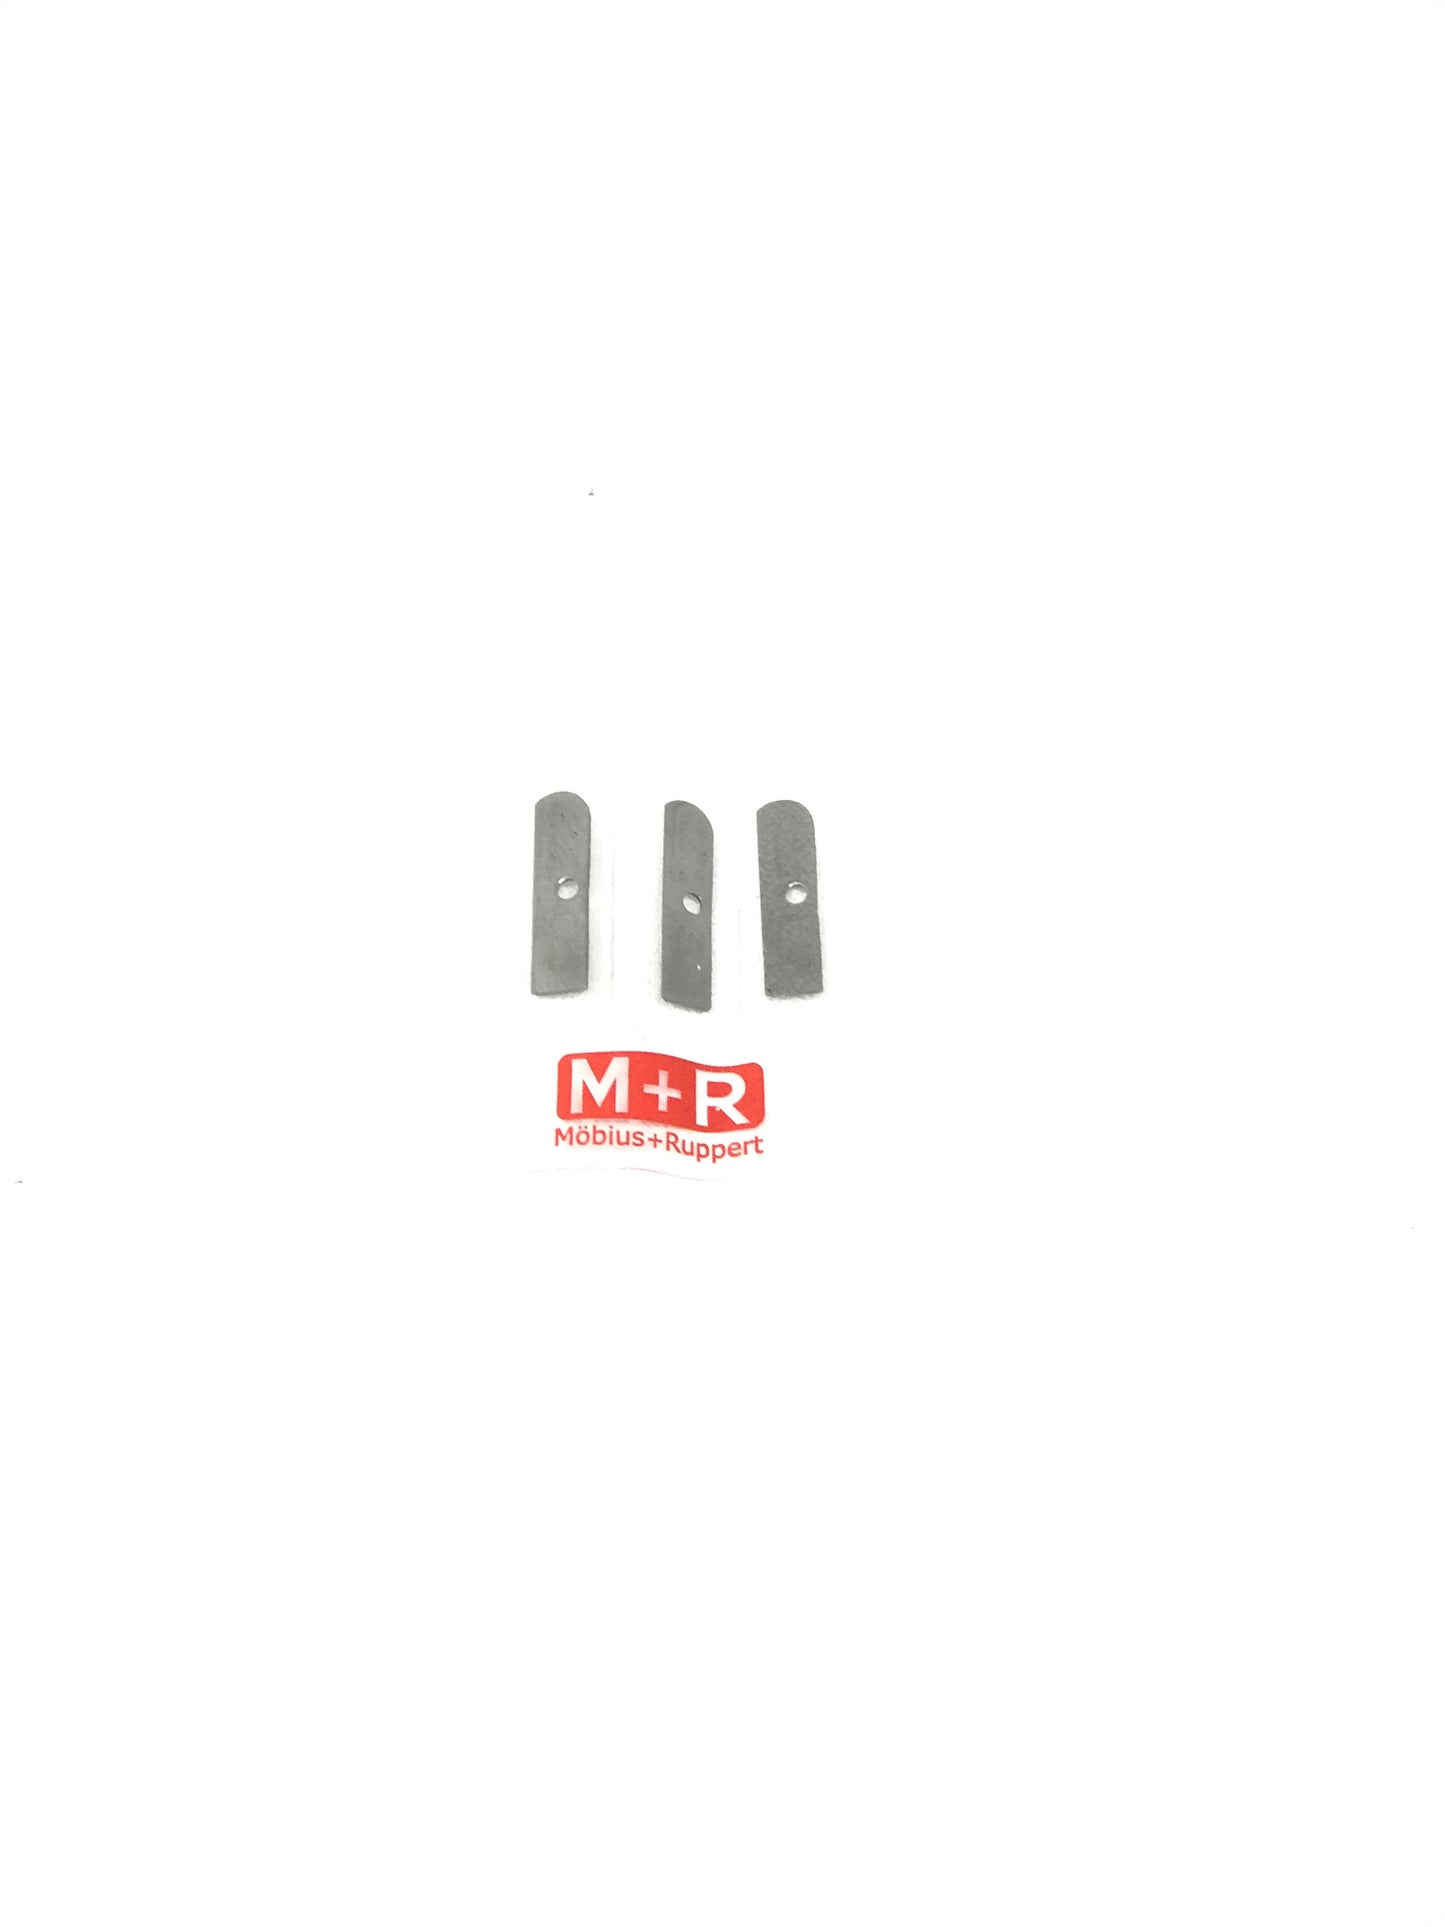 Long Point Sharpener Replacement Blades (Set of 3)